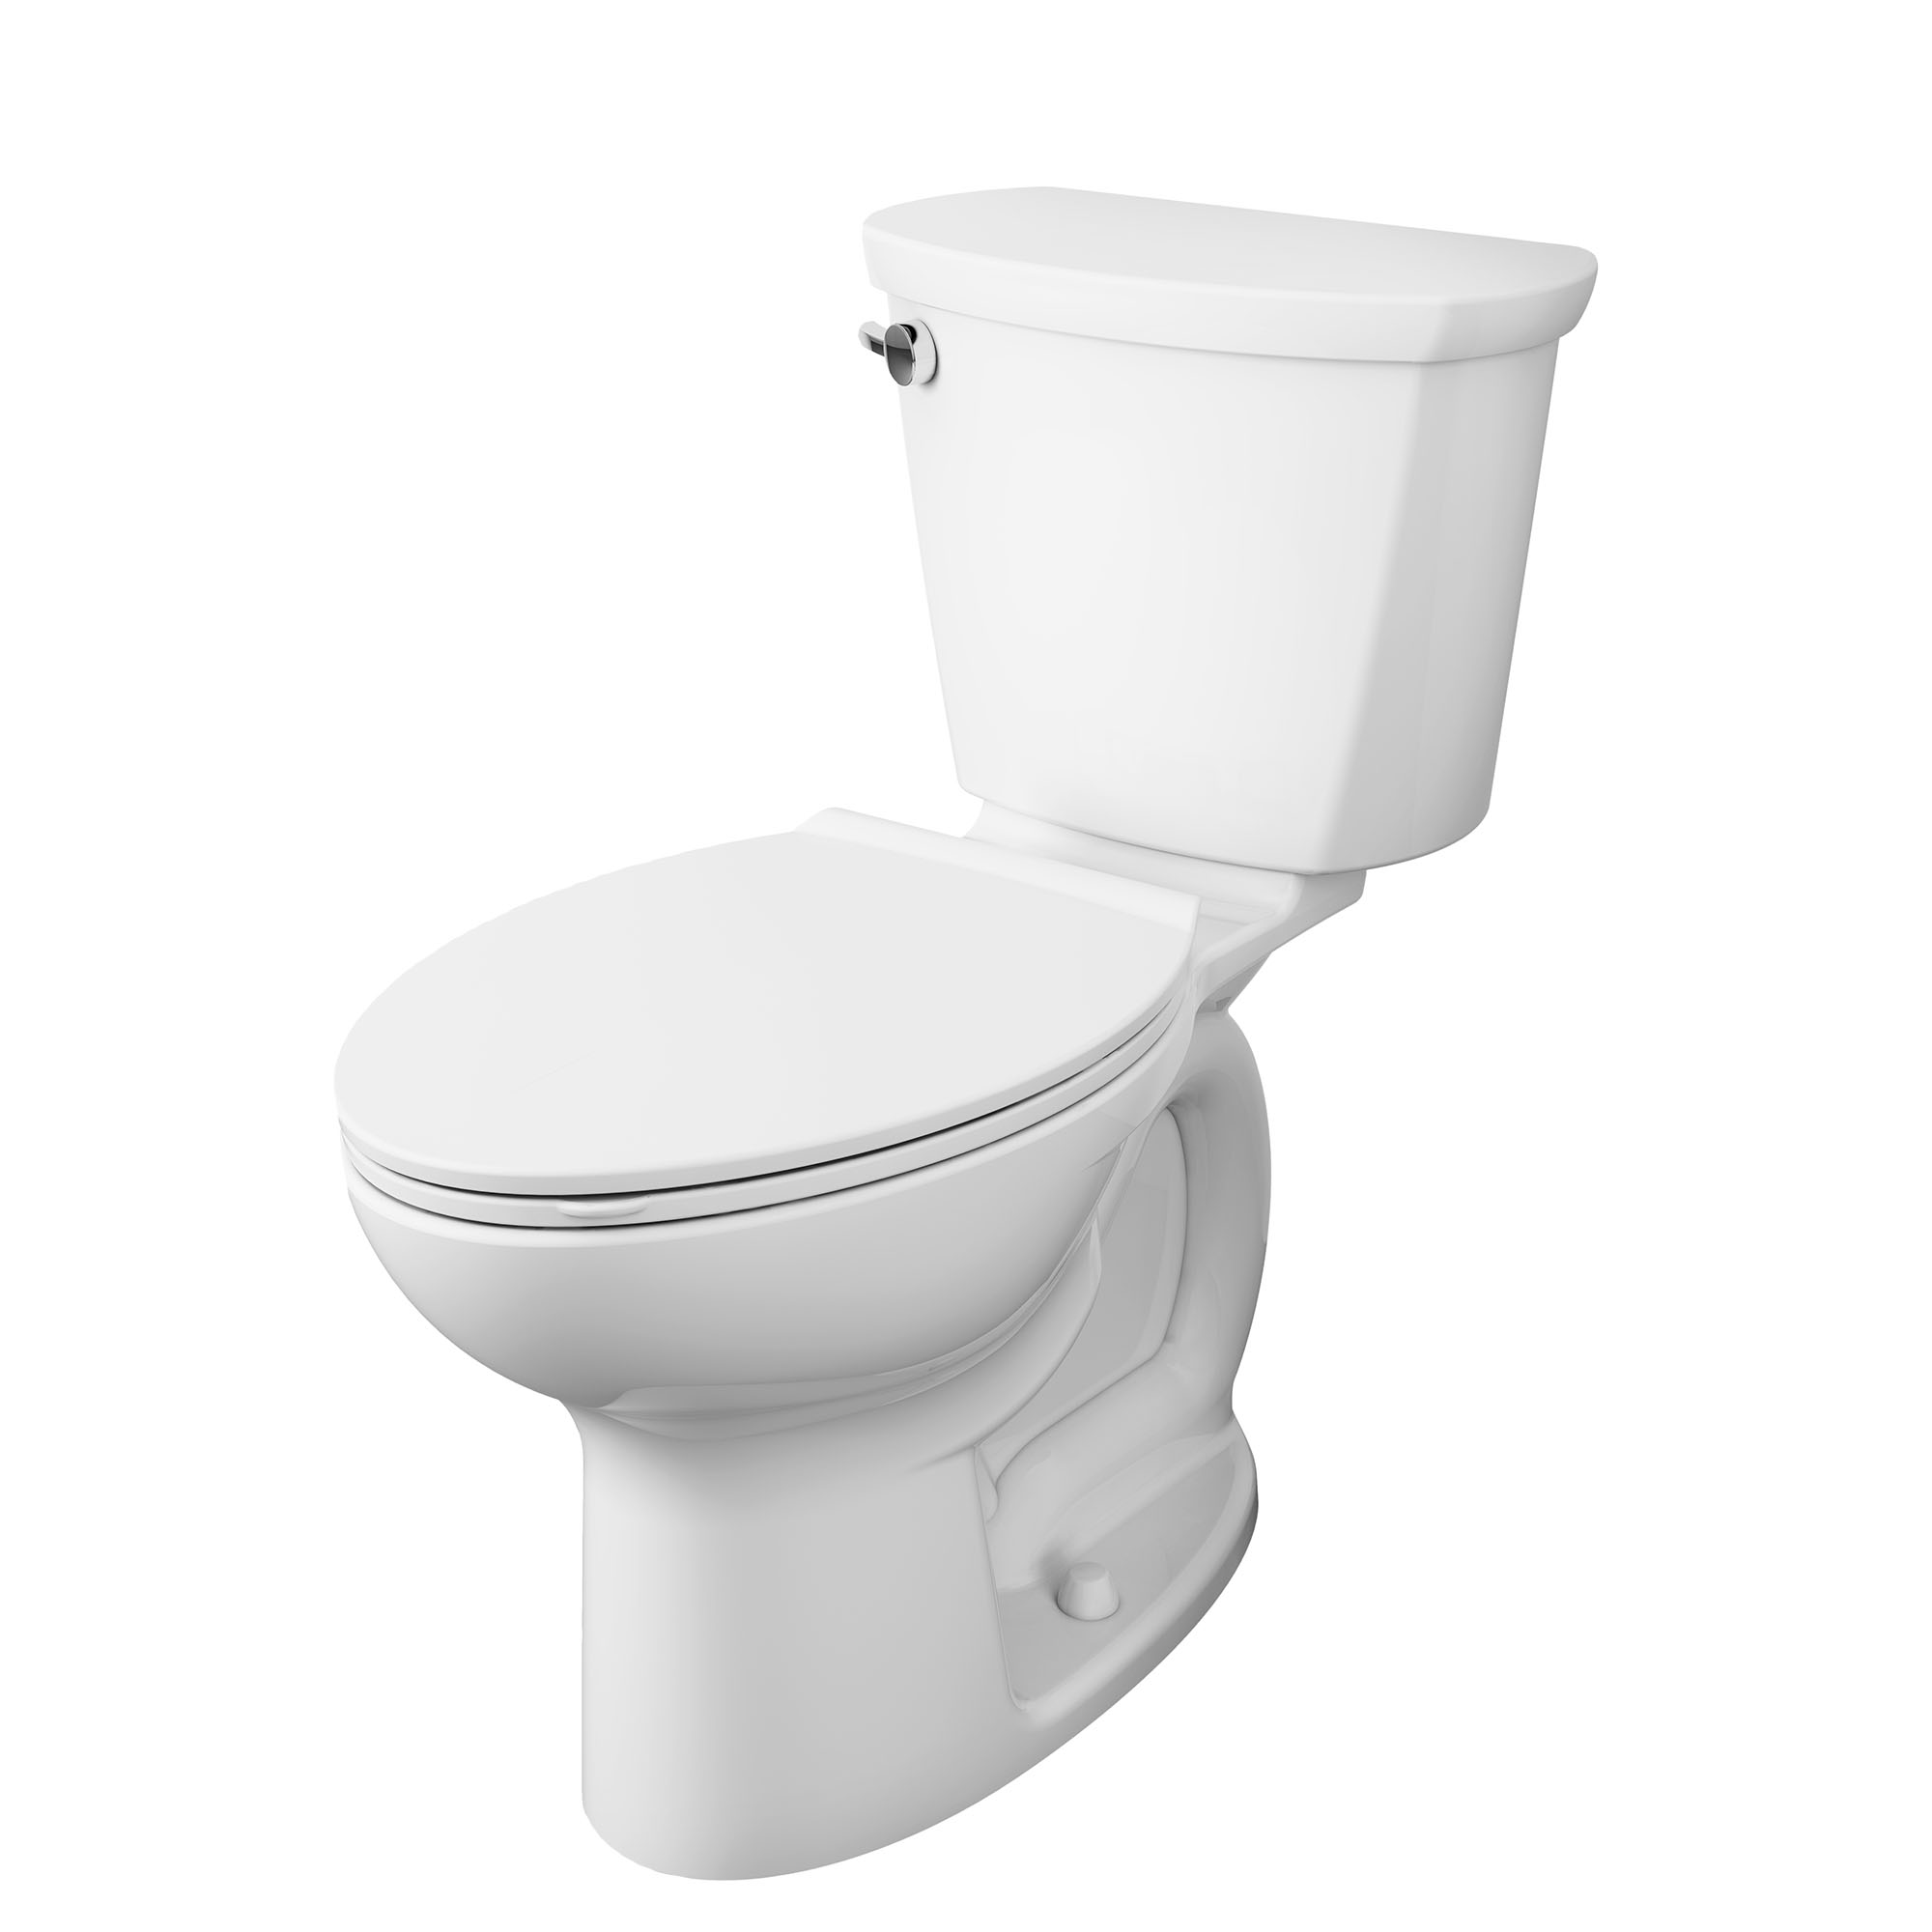 Cadet™ PRO Two-Piece 1.6 gpf/6.0 Lpf Compact Chair Height Elongated 14-Inch Rough Toilet Less Seat